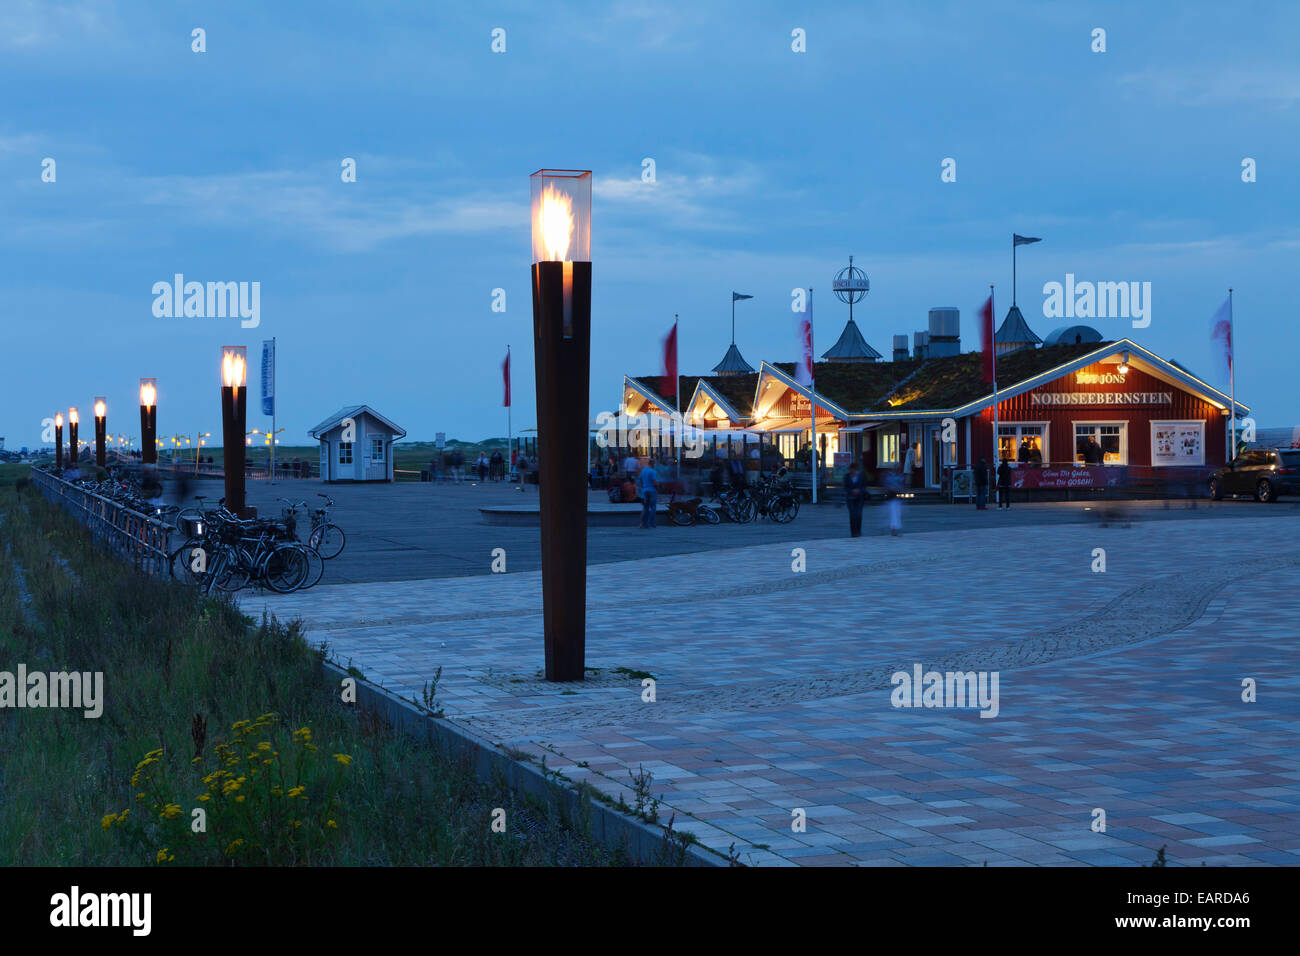 Gas beacons at the new pier at dusk, St. Peter-Ording, Eiderstedt, North Frisia, Schleswig-Holstein, Germany Stock Photo